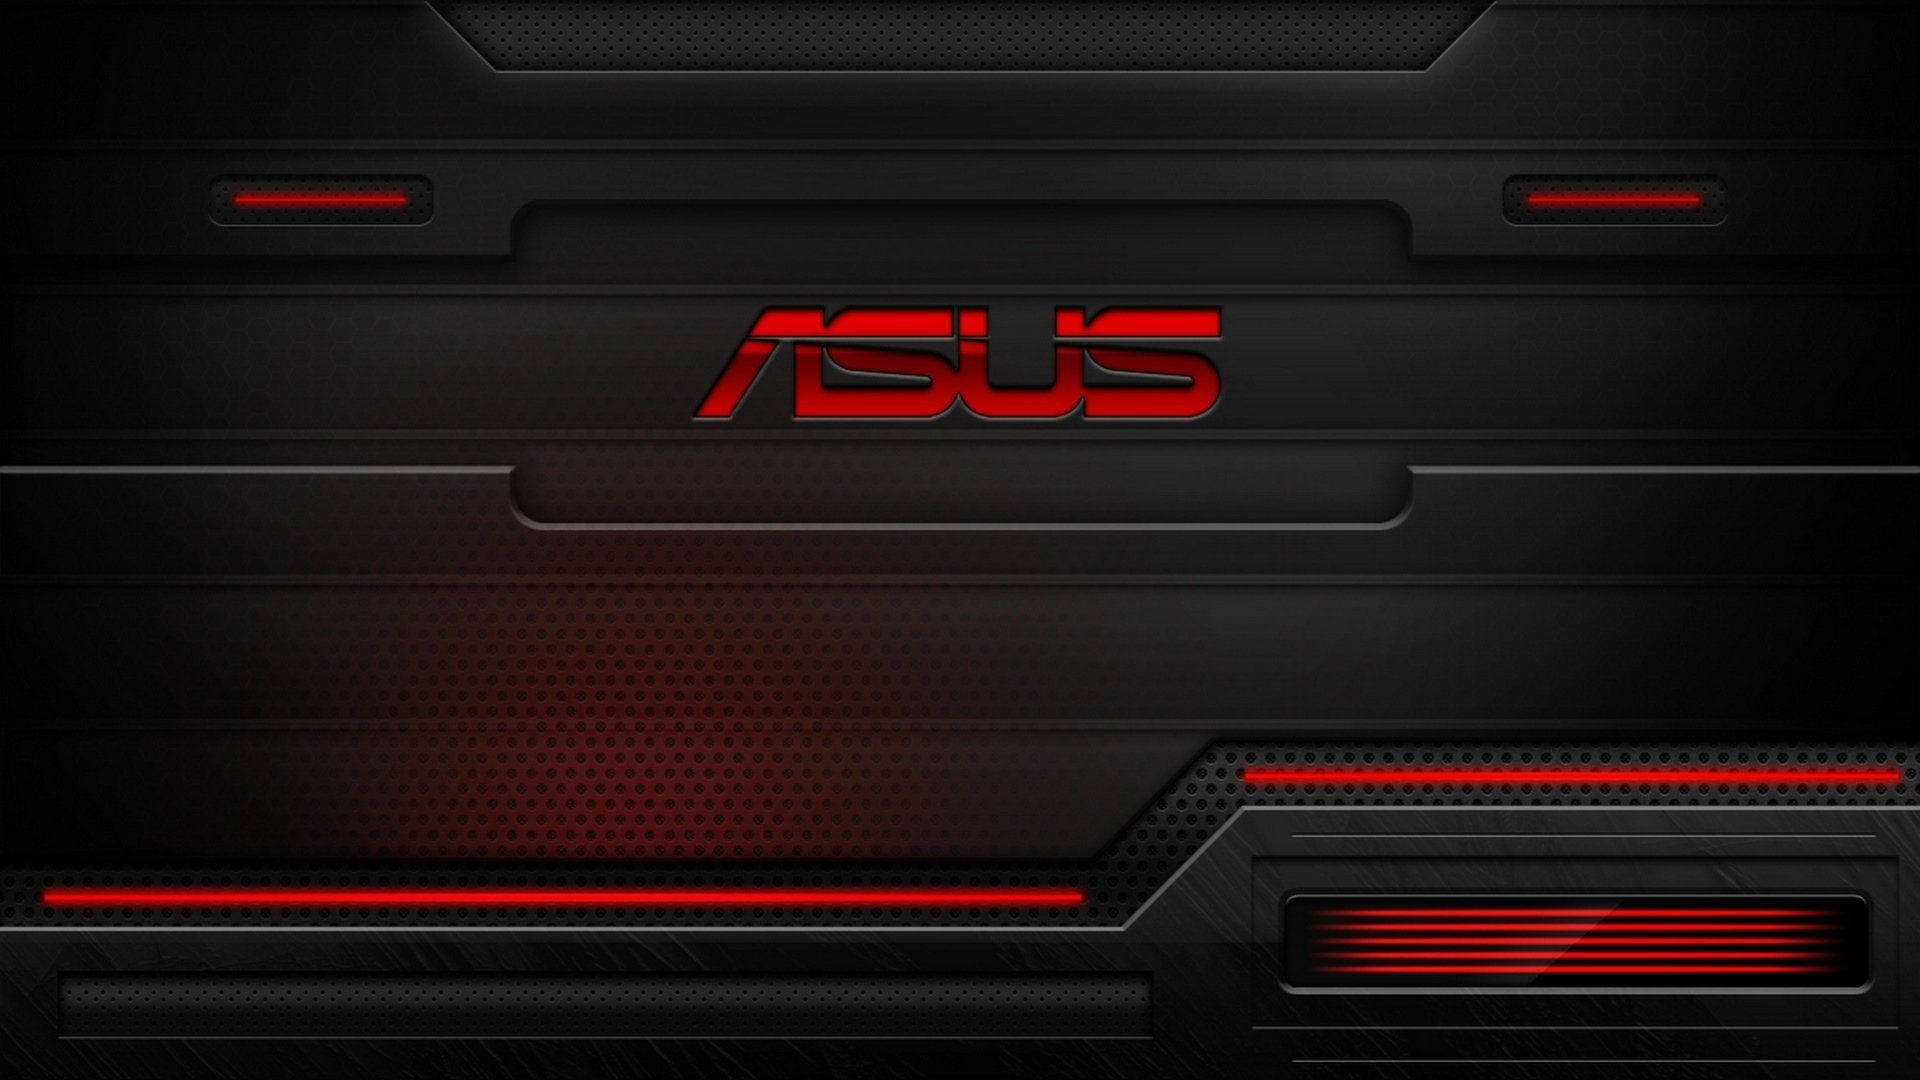 Asus Neon Red Logo Picture